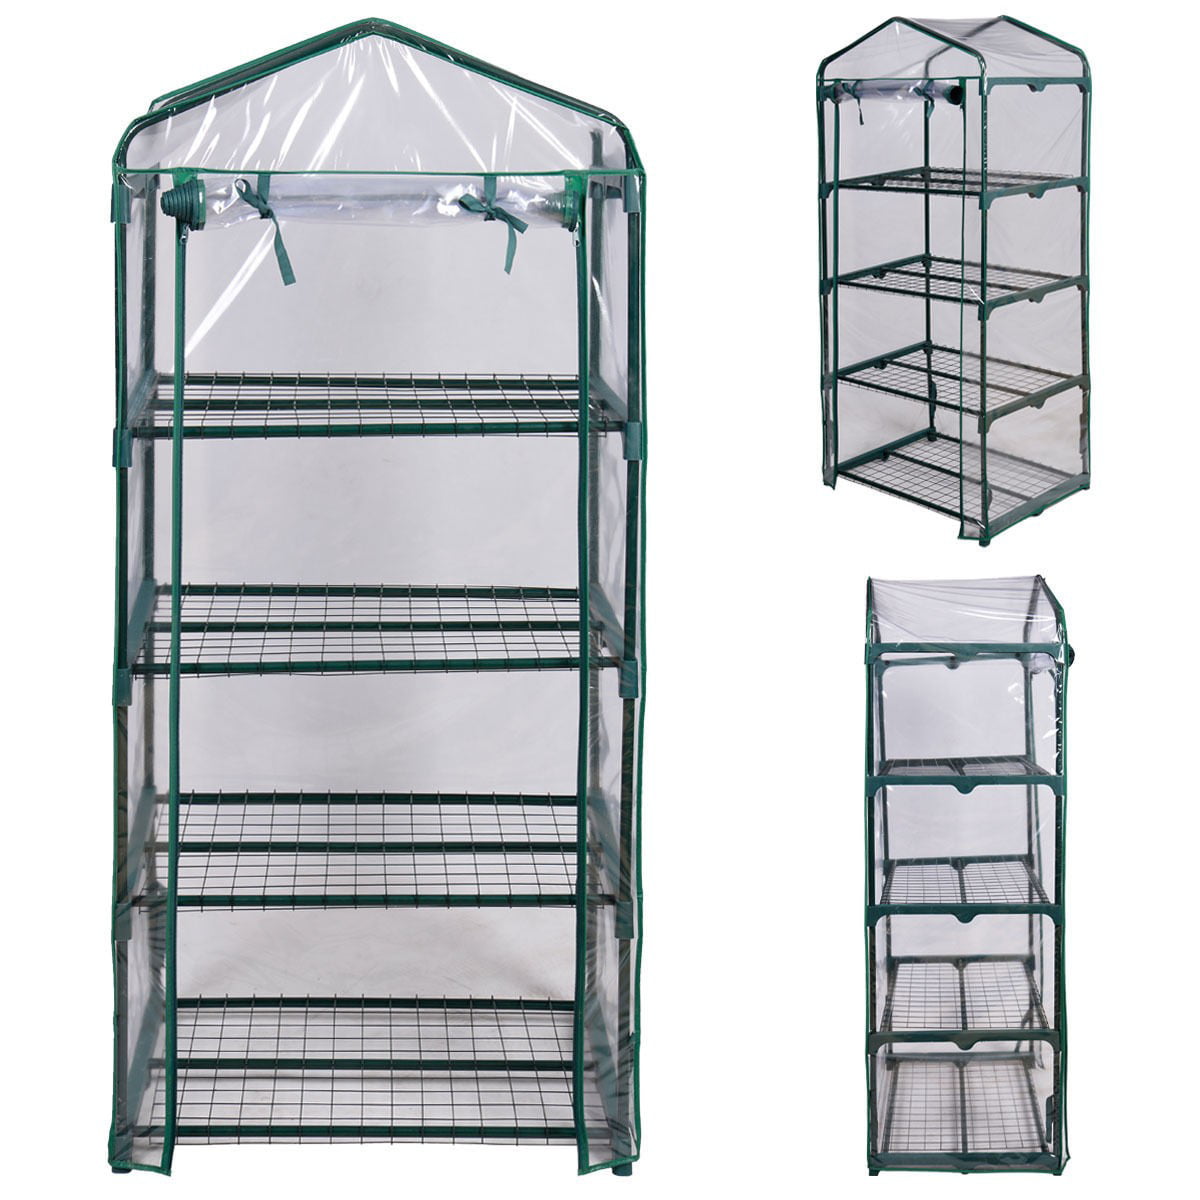 GreenWise® Portable 4 Shelves Walk In Greenhouse Outdoor 4 Tier Green House 